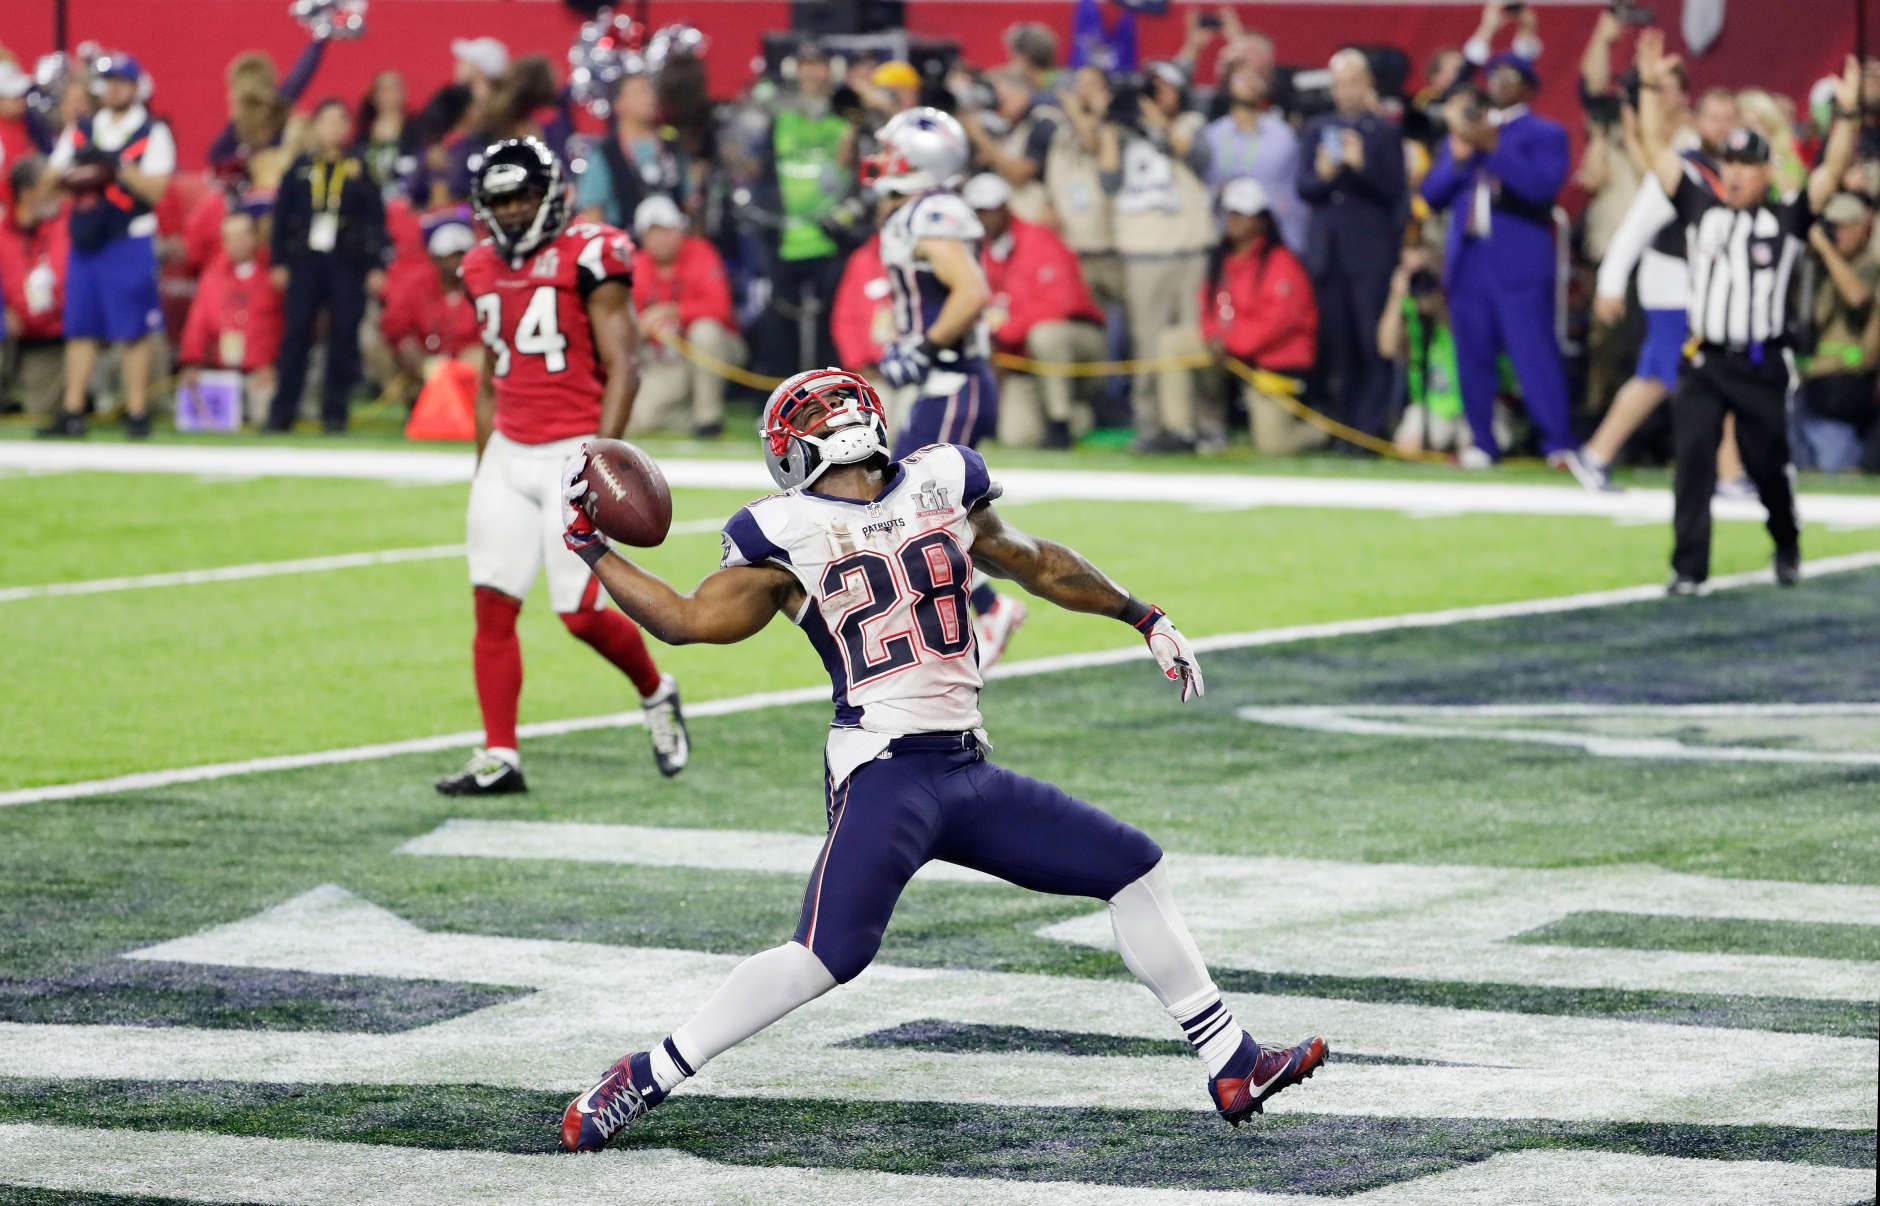 HOUSTON, TX - FEBRUARY 05:  James White #28 of the New England Patriots celebrates rushing for a 1-yard touchdown in the fourth quarter against the Atlanta Falcons during Super Bowl 51 at NRG Stadium on February 5, 2017 in Houston, Texas.  (Photo by Jamie Squire/Getty Images)